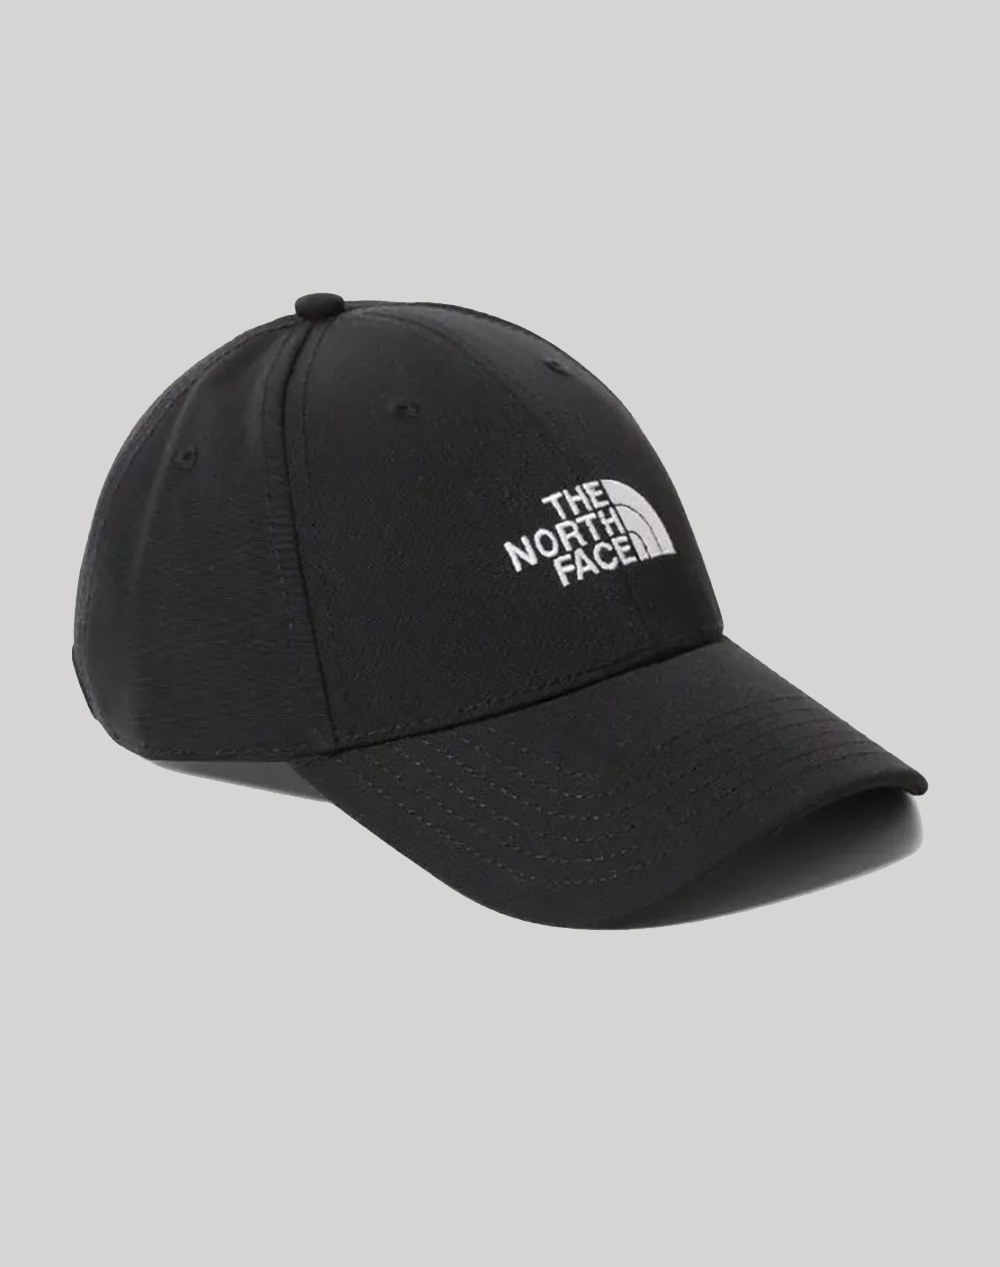 THE NORTH FACE RECYCLED 66 CLASSIC HAT NF0A4VSV-NFKY4 Black